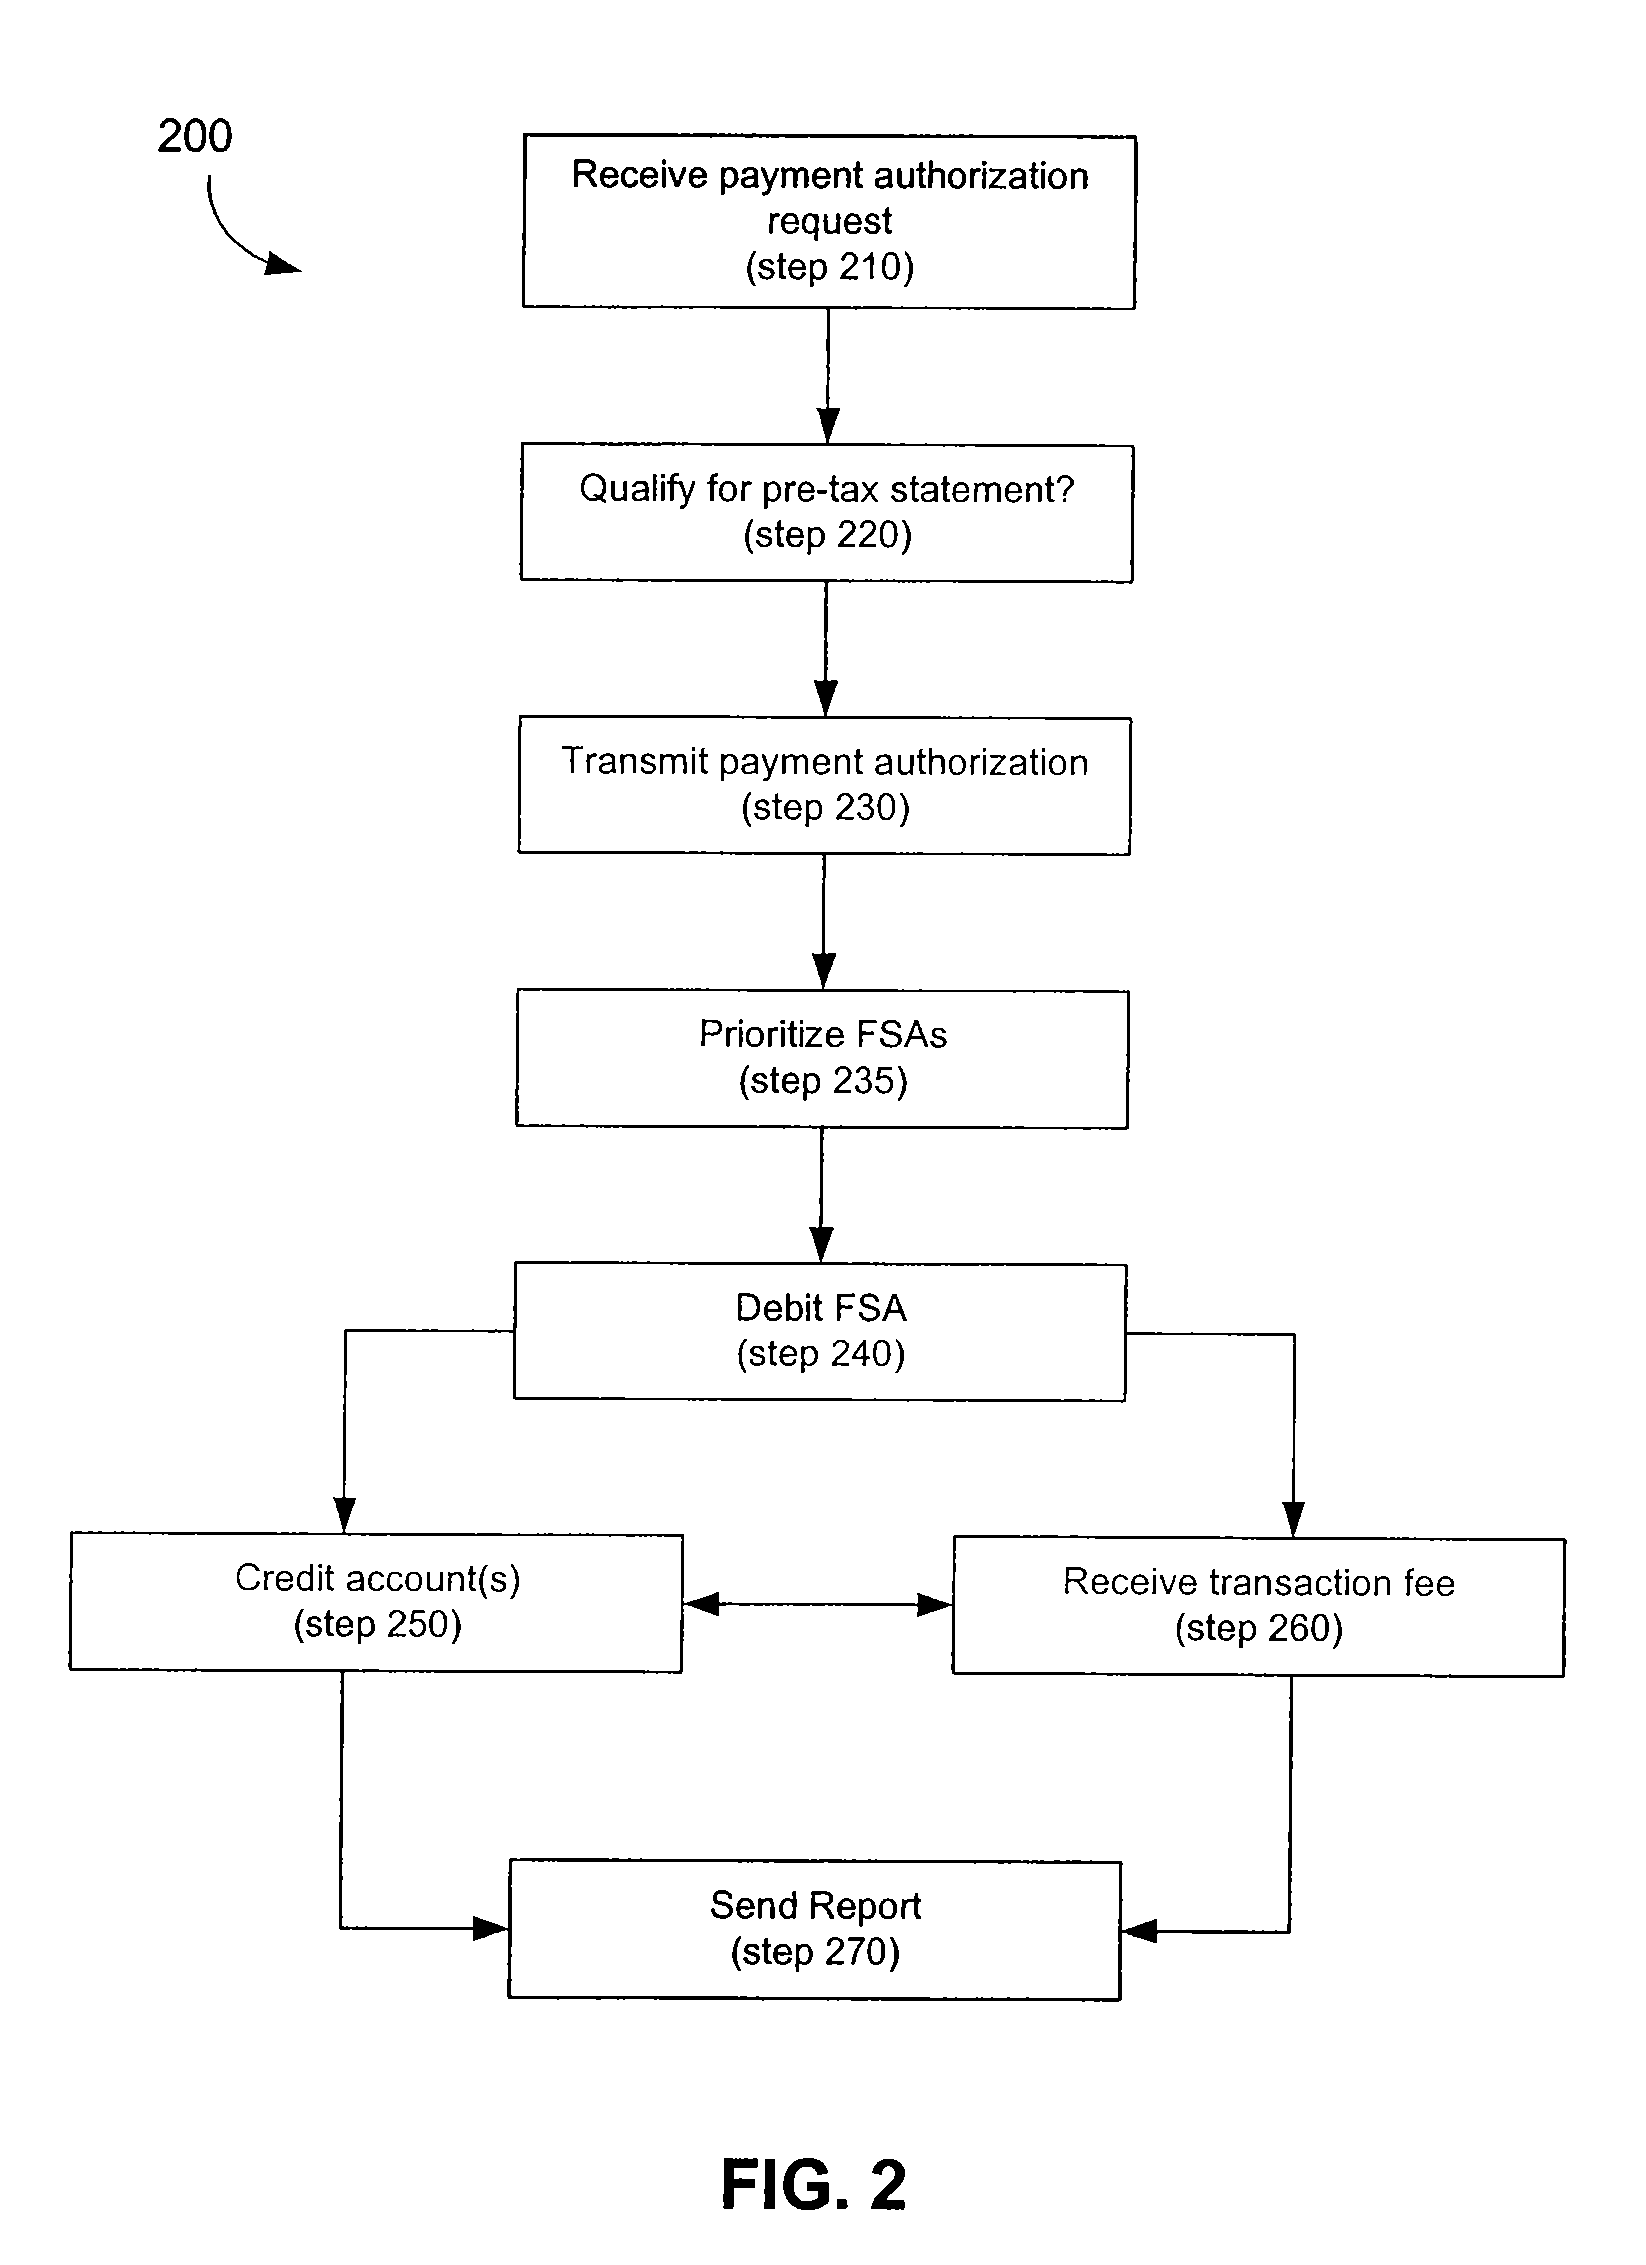 Spending Account Systems and Methods